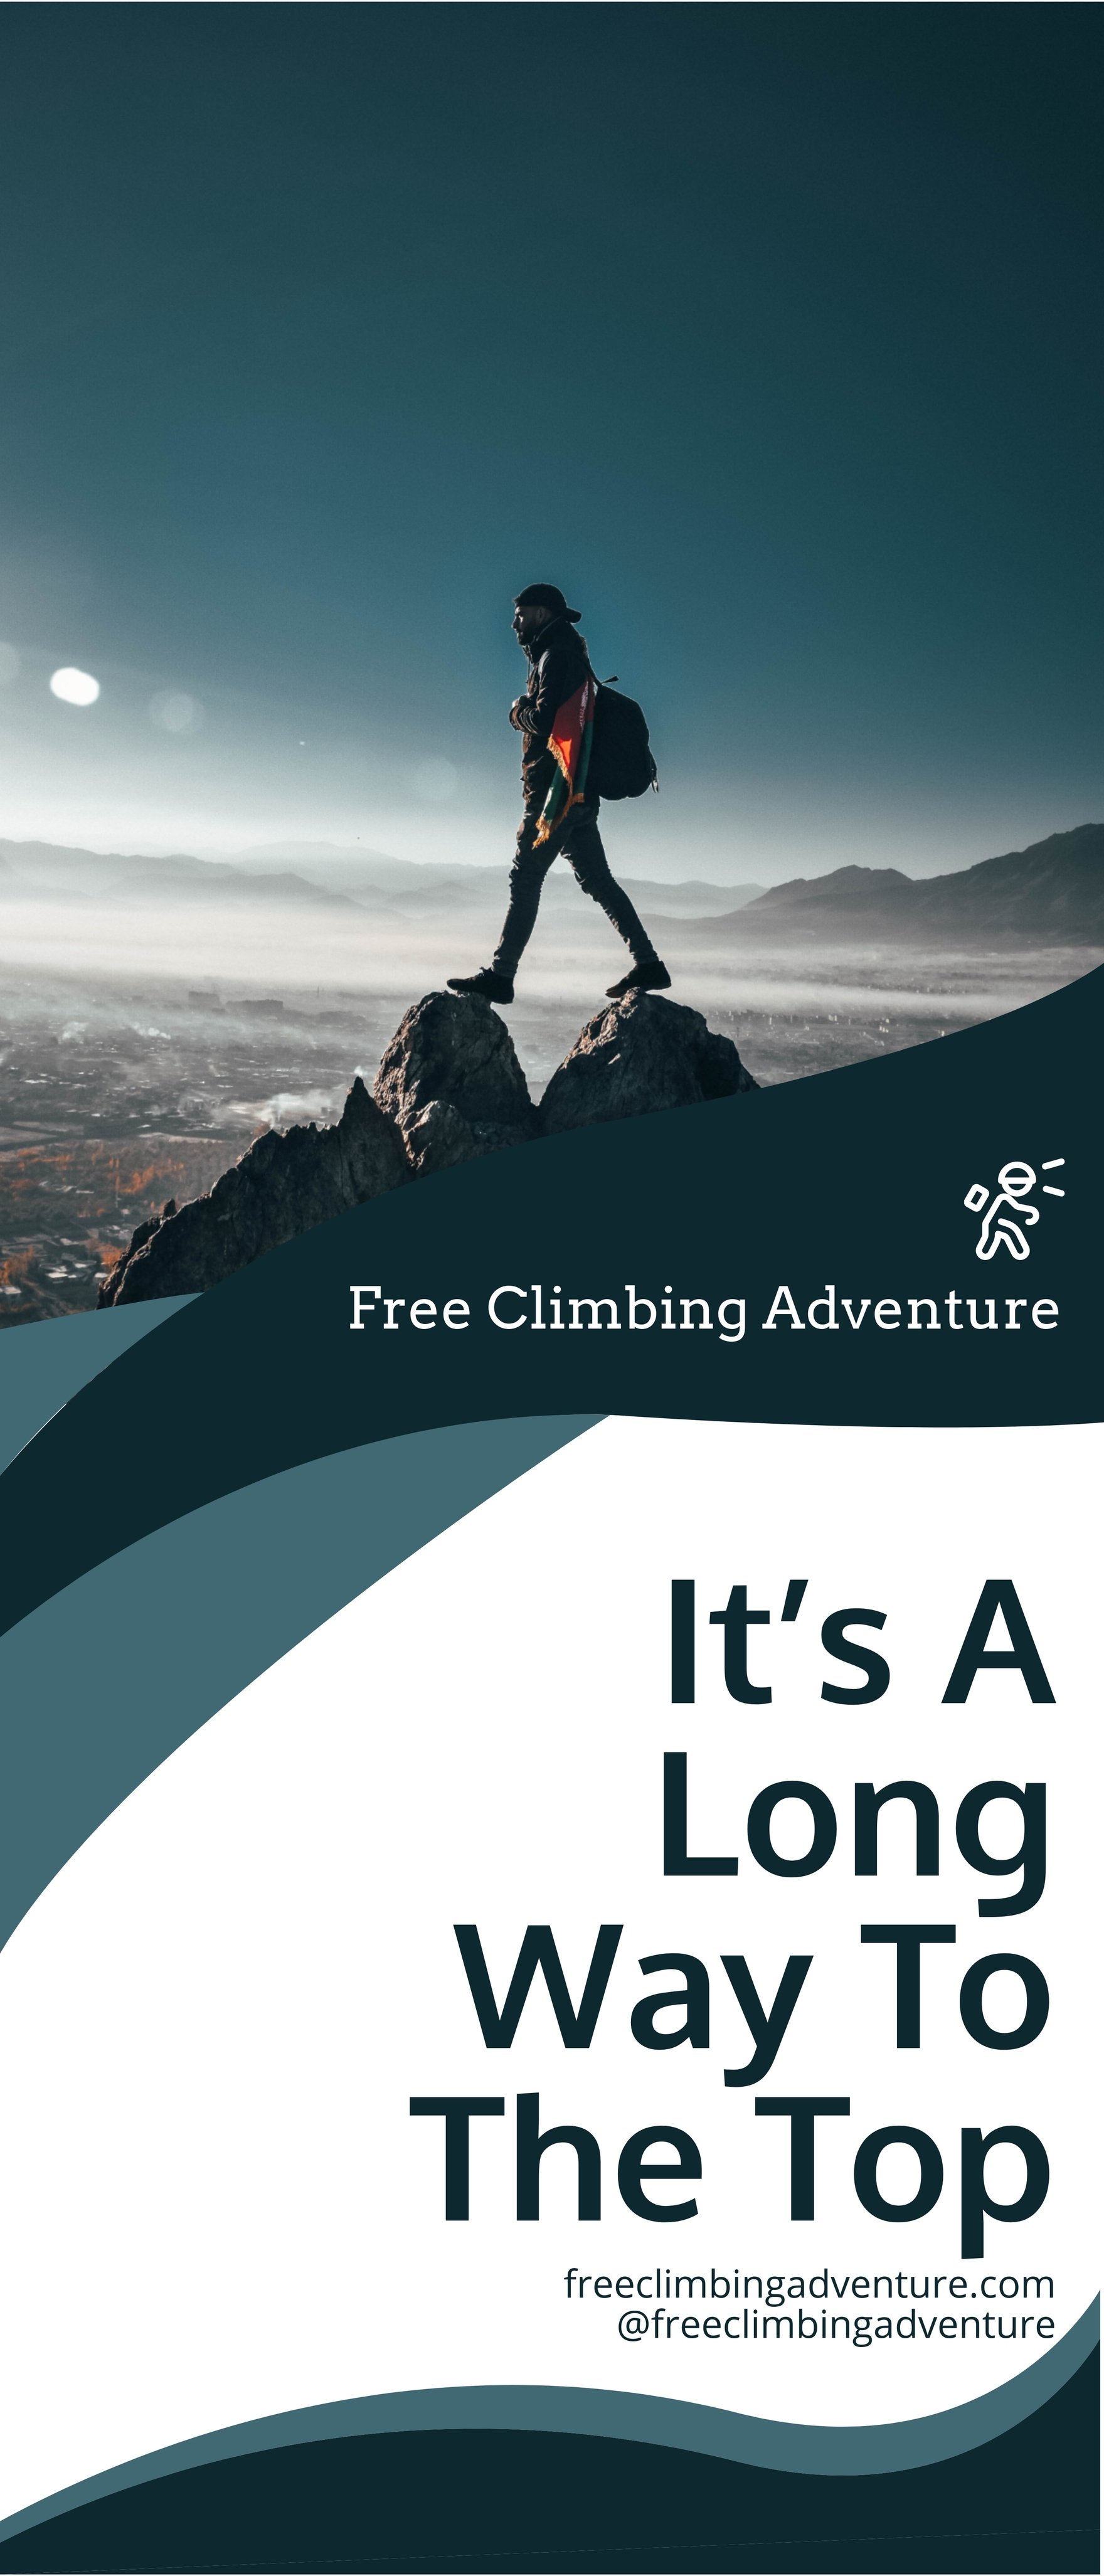 Climbing Sport Roll-Up Banner Template in Word, Google Docs, Illustrator, PSD, Publisher